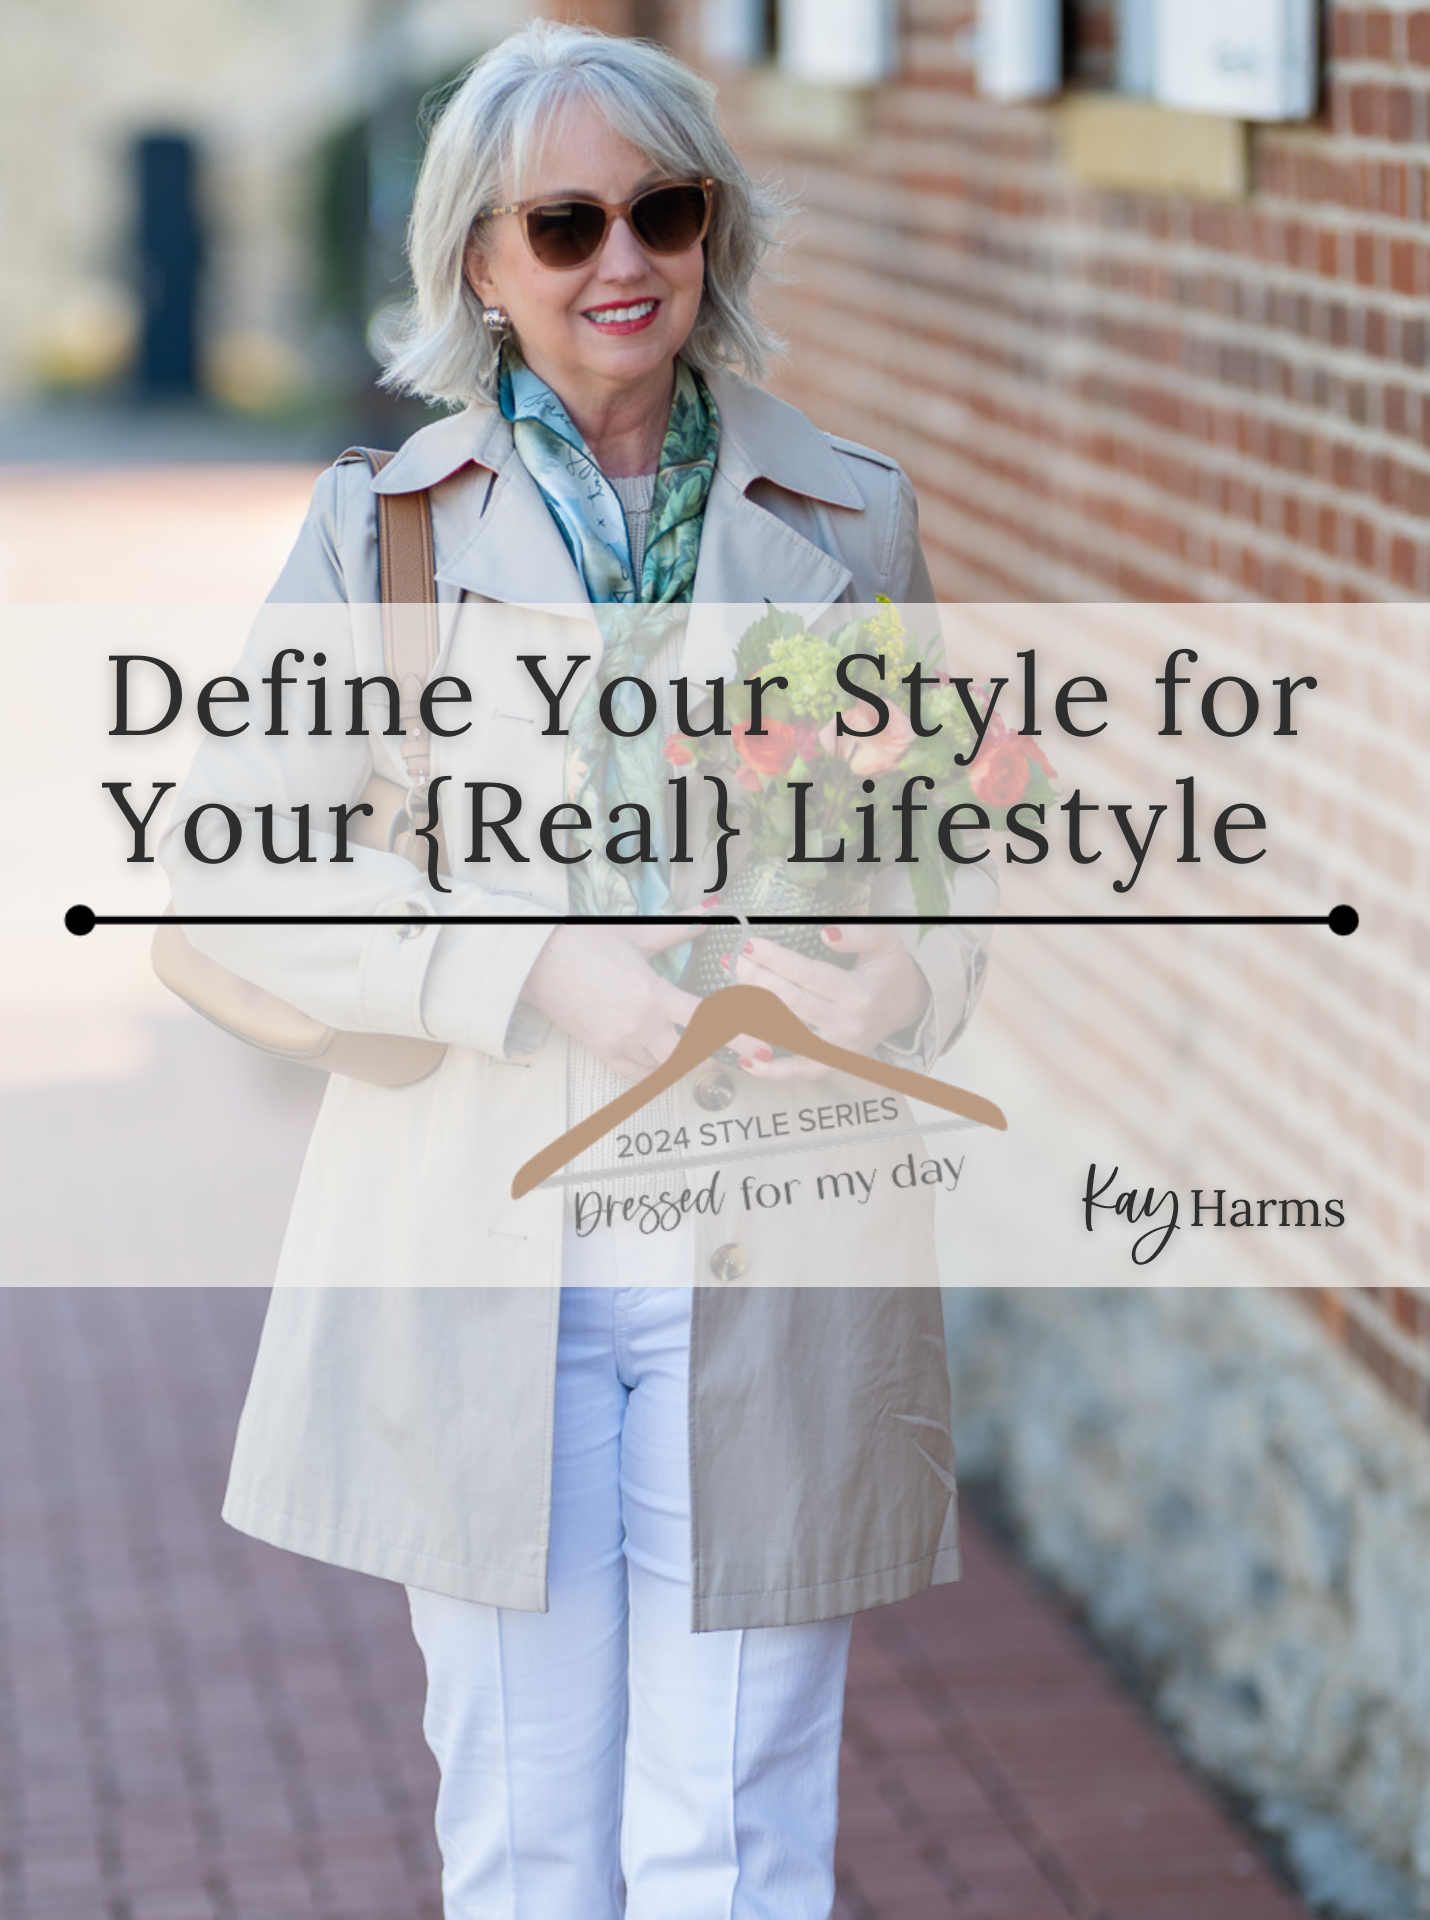 A majority of my style clients struggle with finding flattering